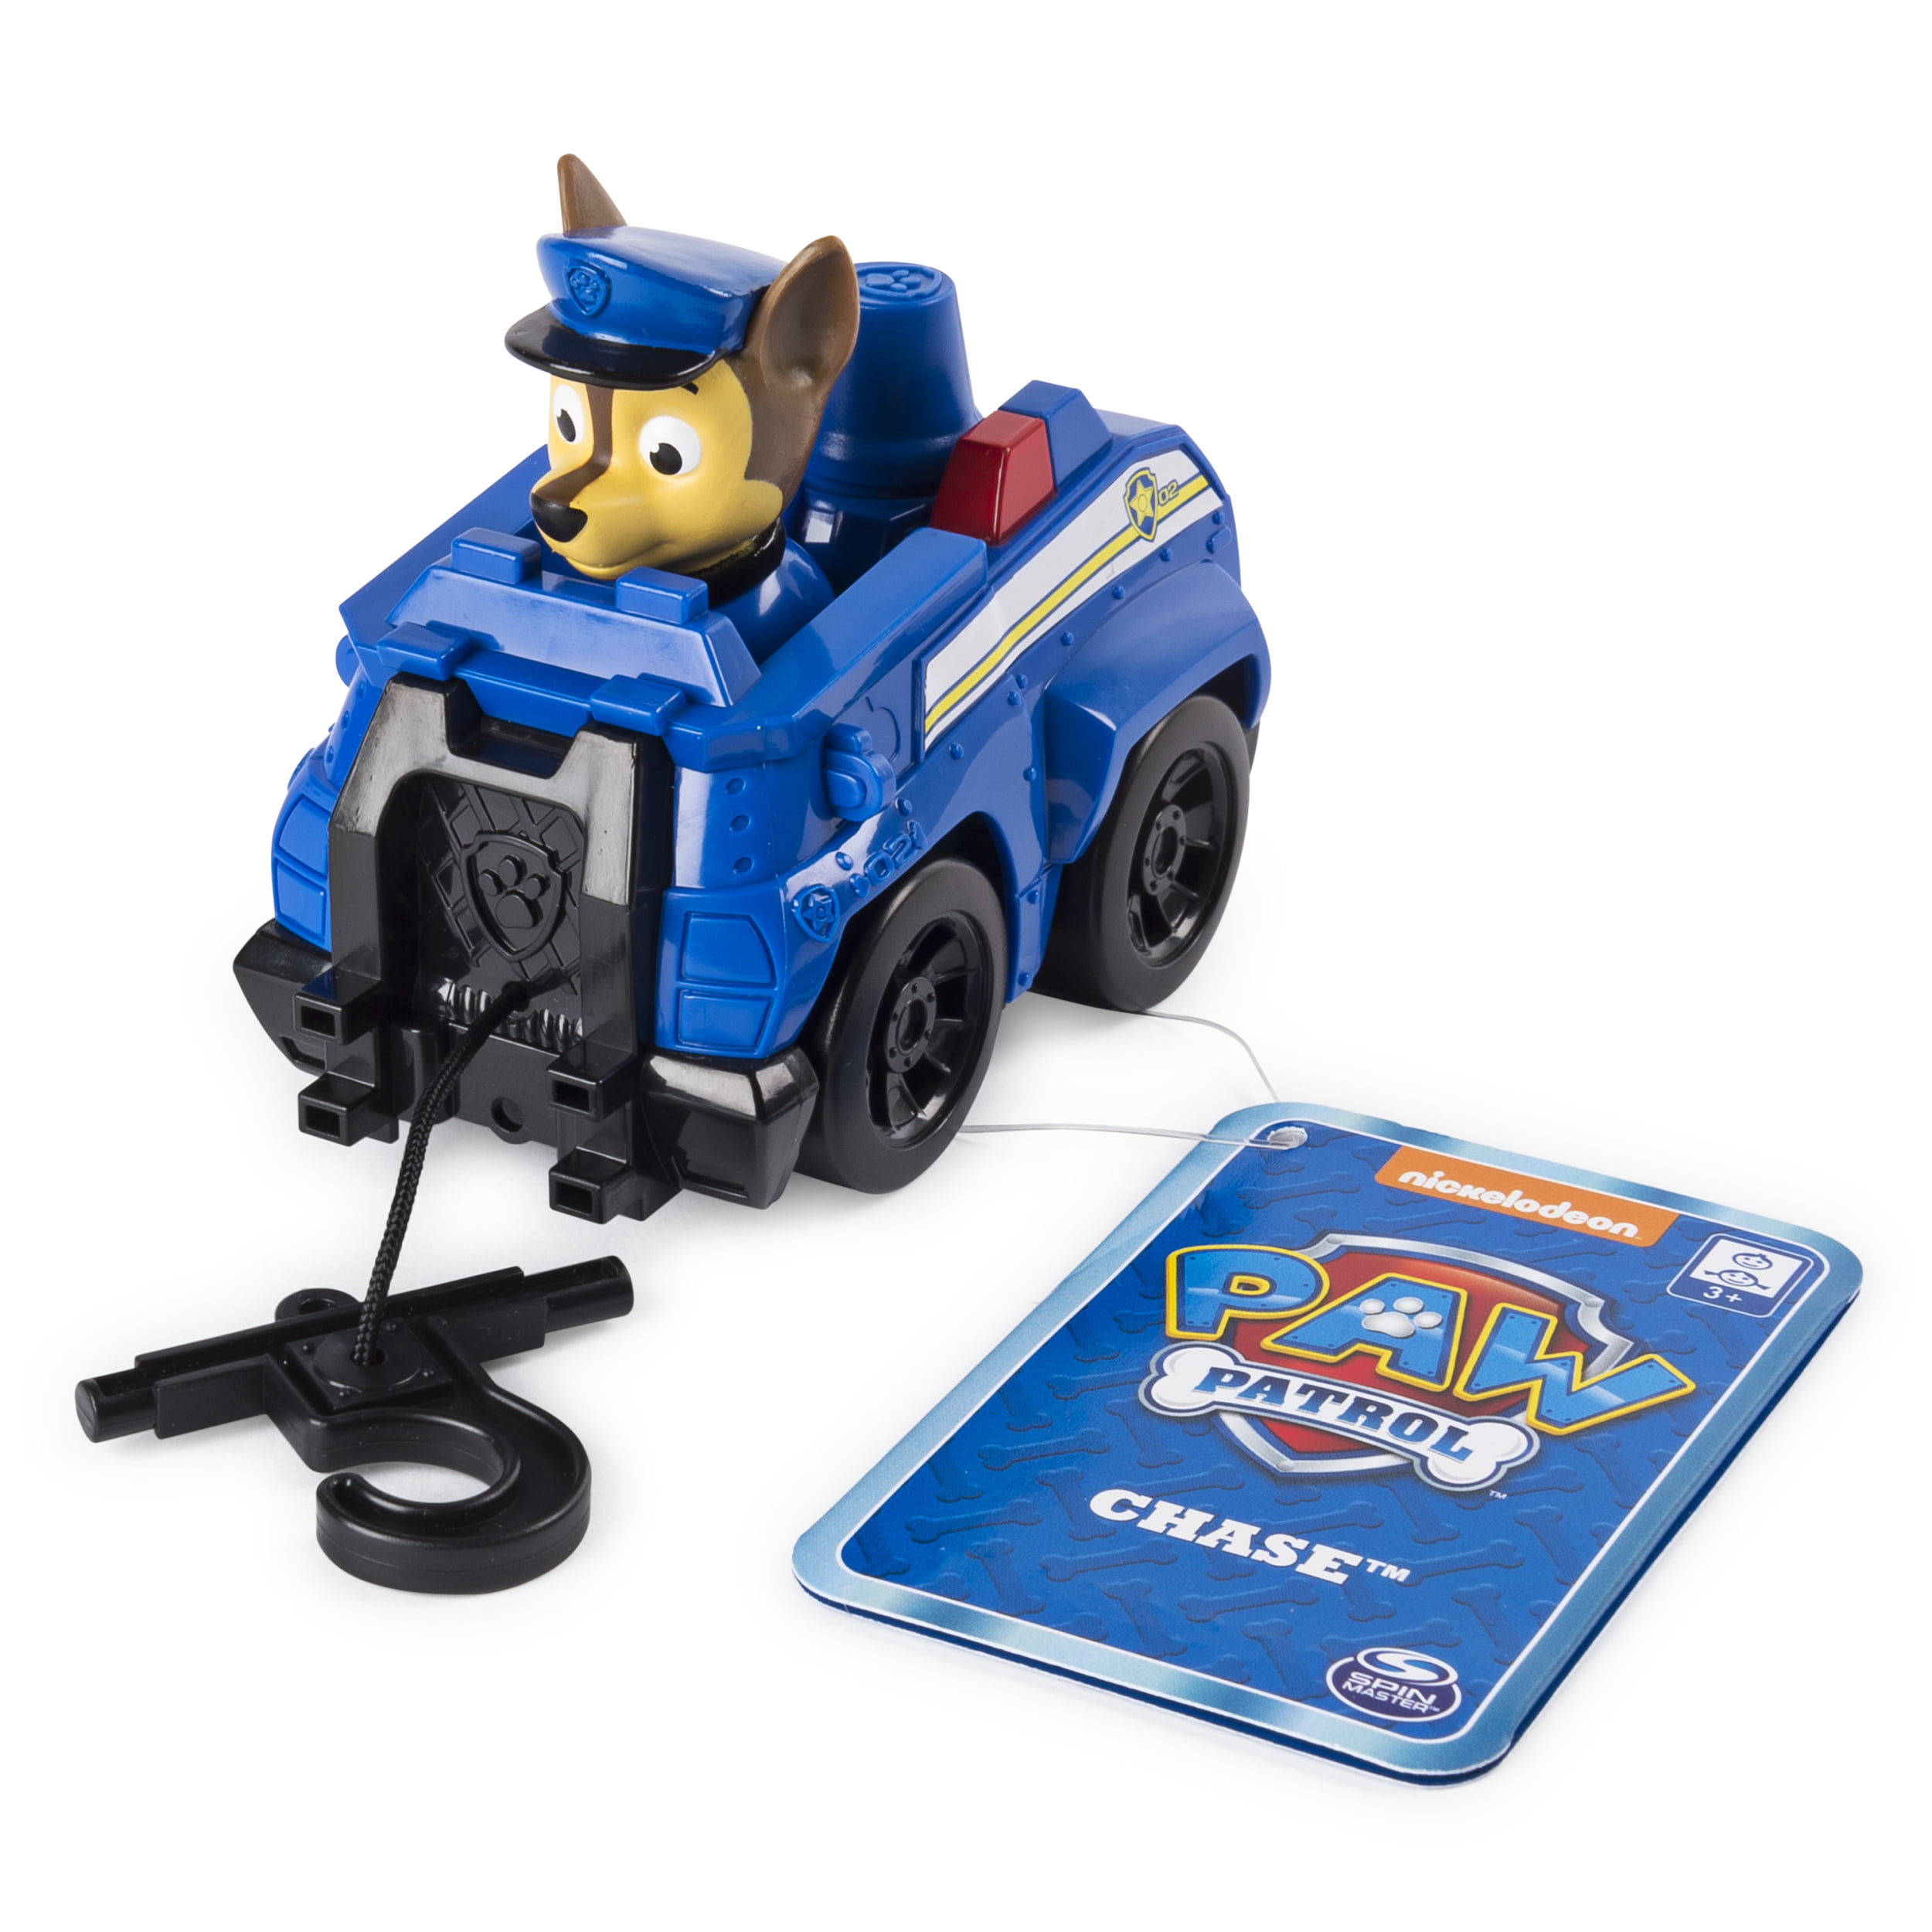 Patrol - Rescue Racer with Extendable Hook, for Ages 3 and Up Walmart.com